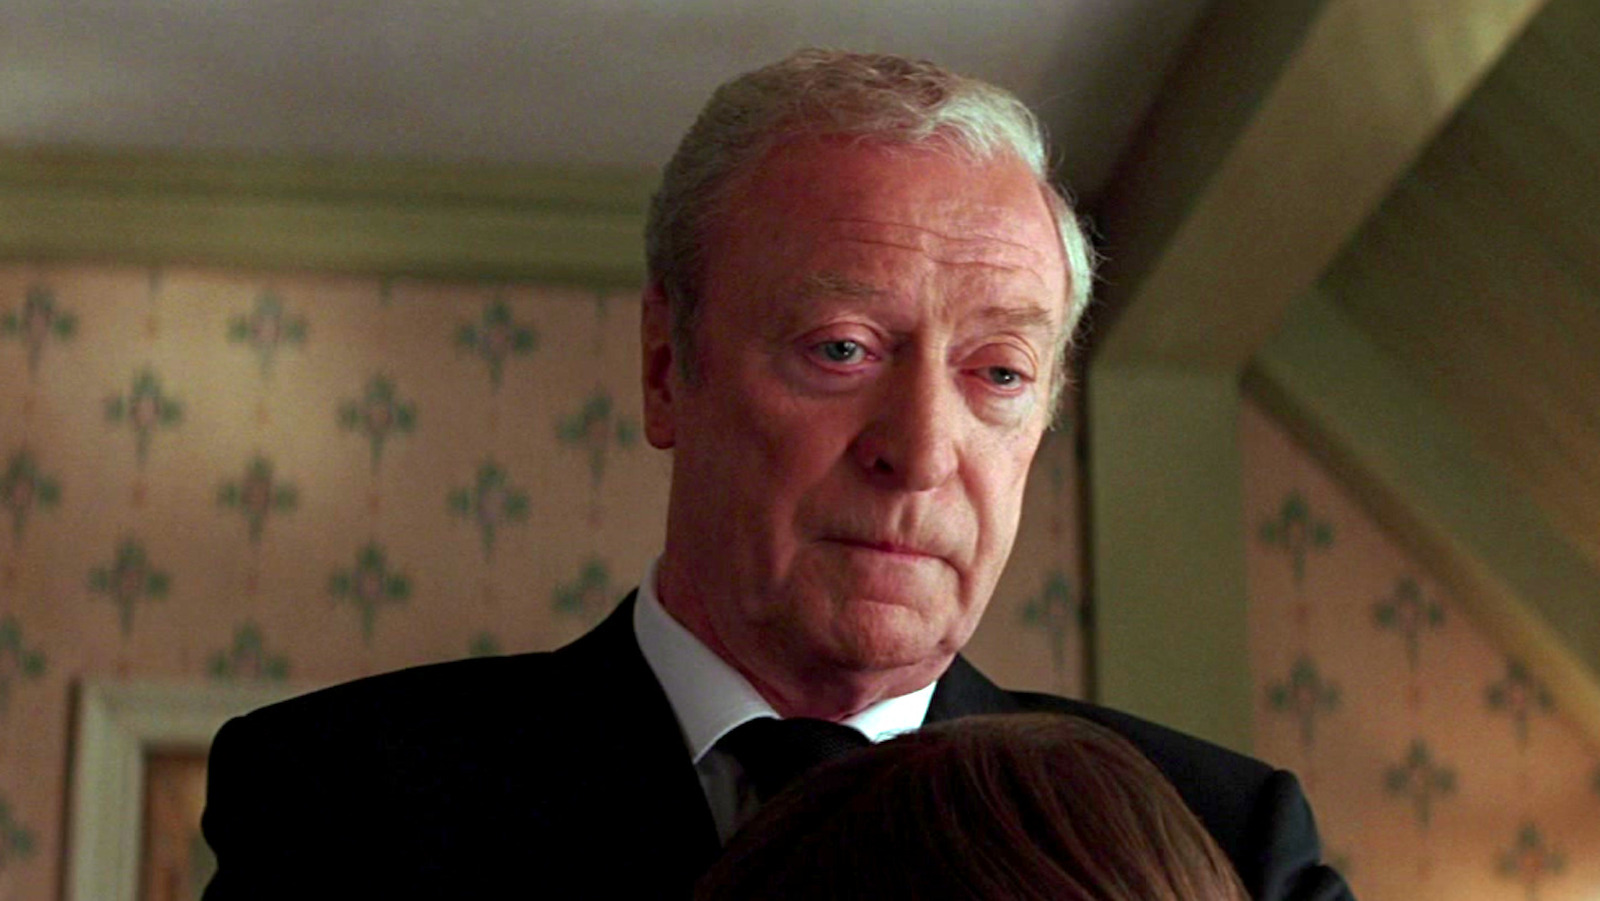 Michael Caine's Big Break Didn't Come From His Acting Chops